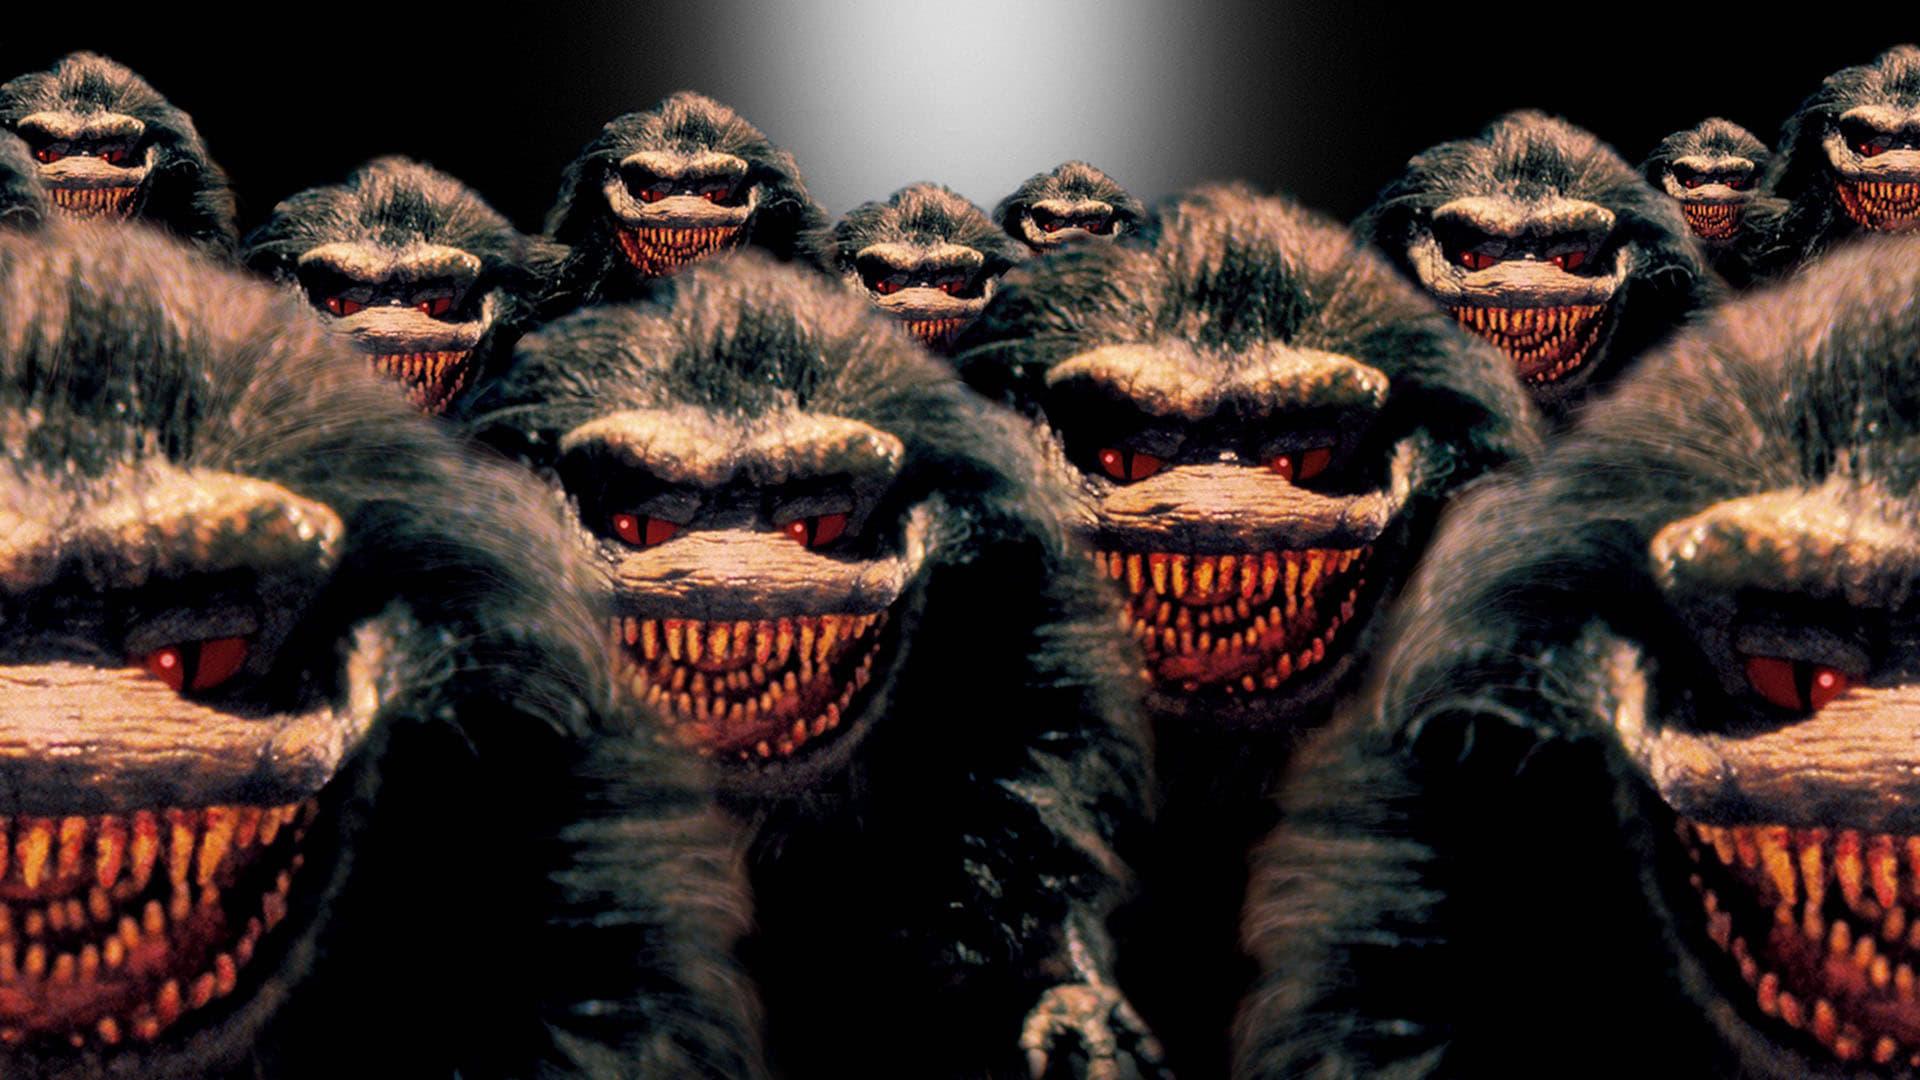 Critters backdrop